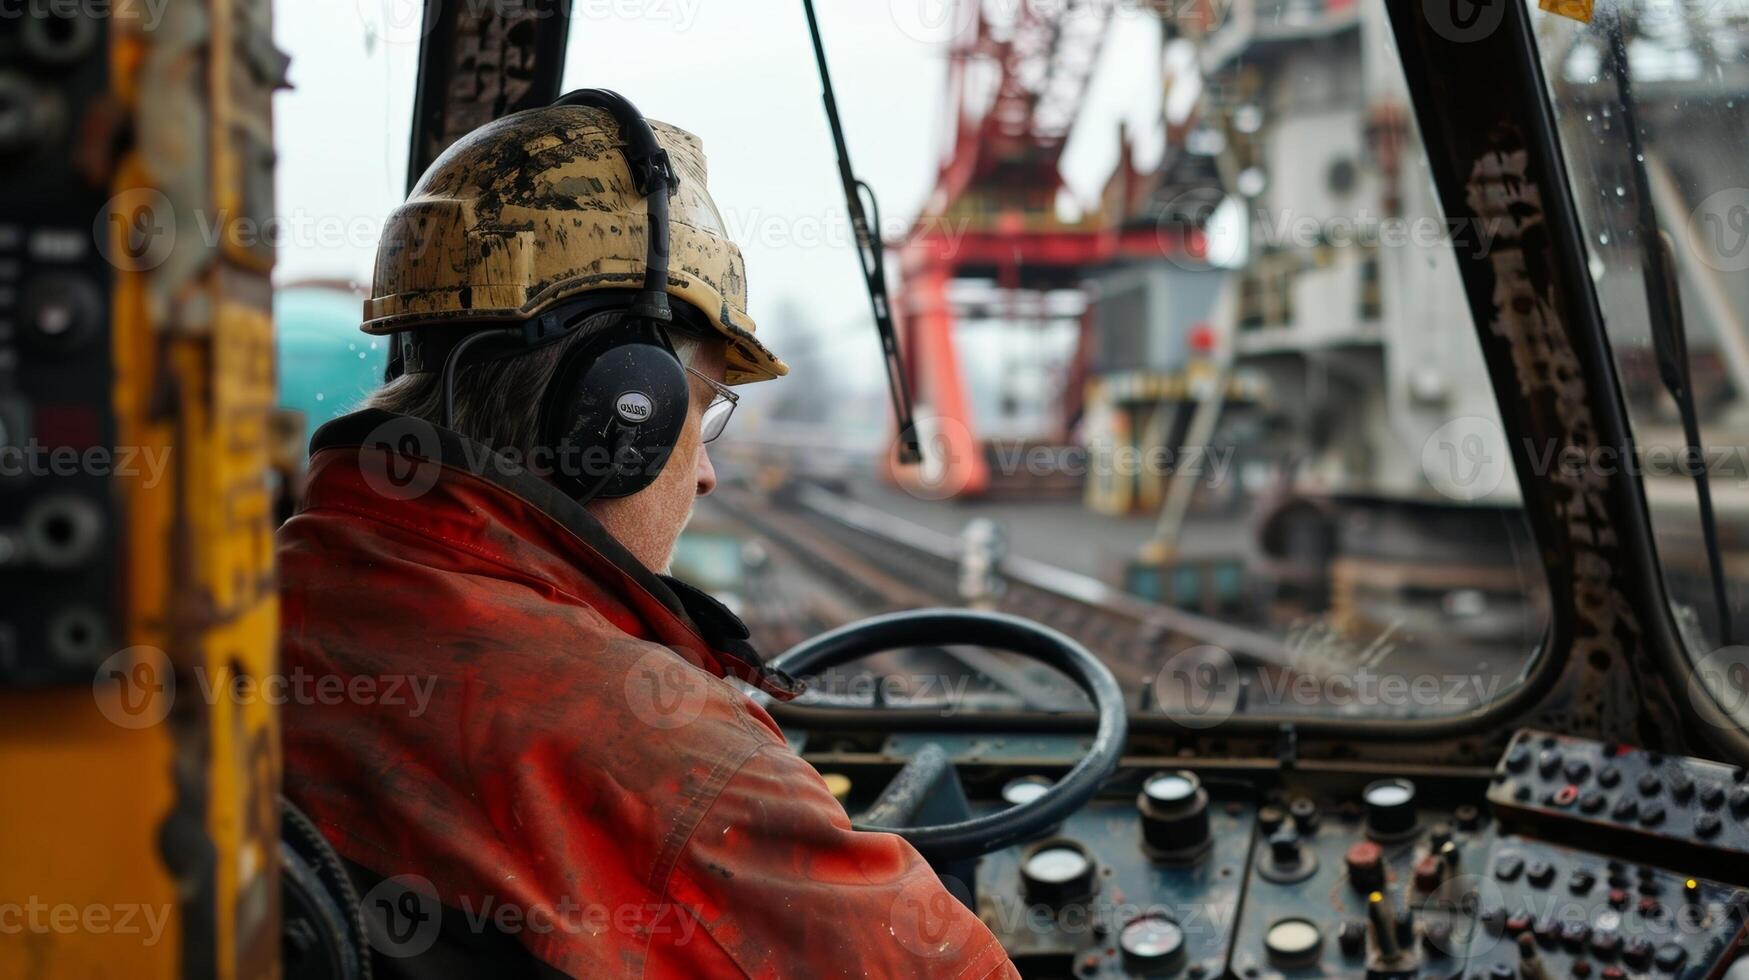 Sitting amid a sea of buttons and levers the operator expertly navigates the crane as it lifts heavy materials photo